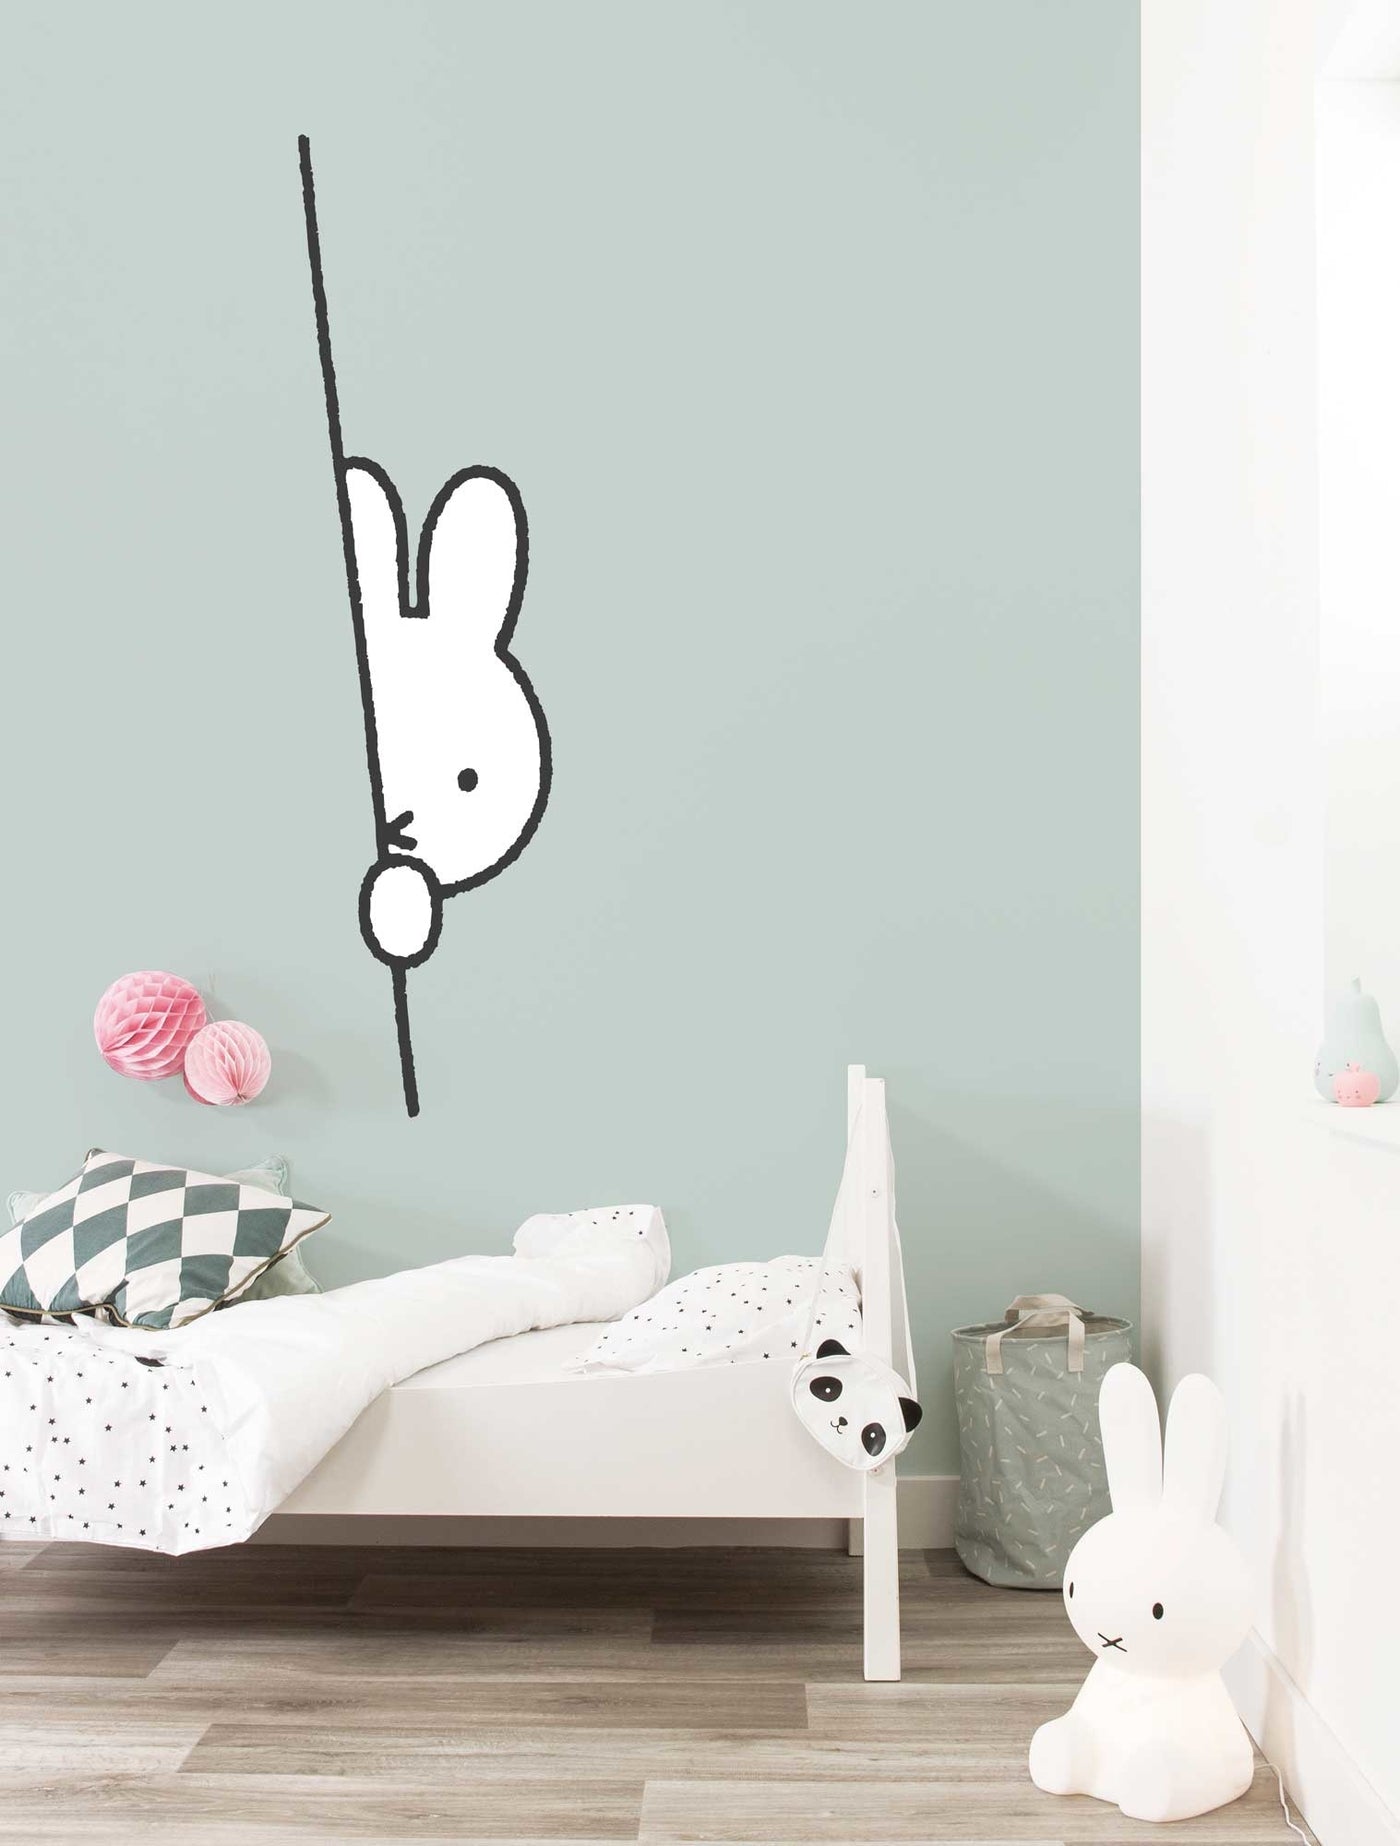 MIFFY STICKERS FRIENDS FOREVER - GoBookshop!